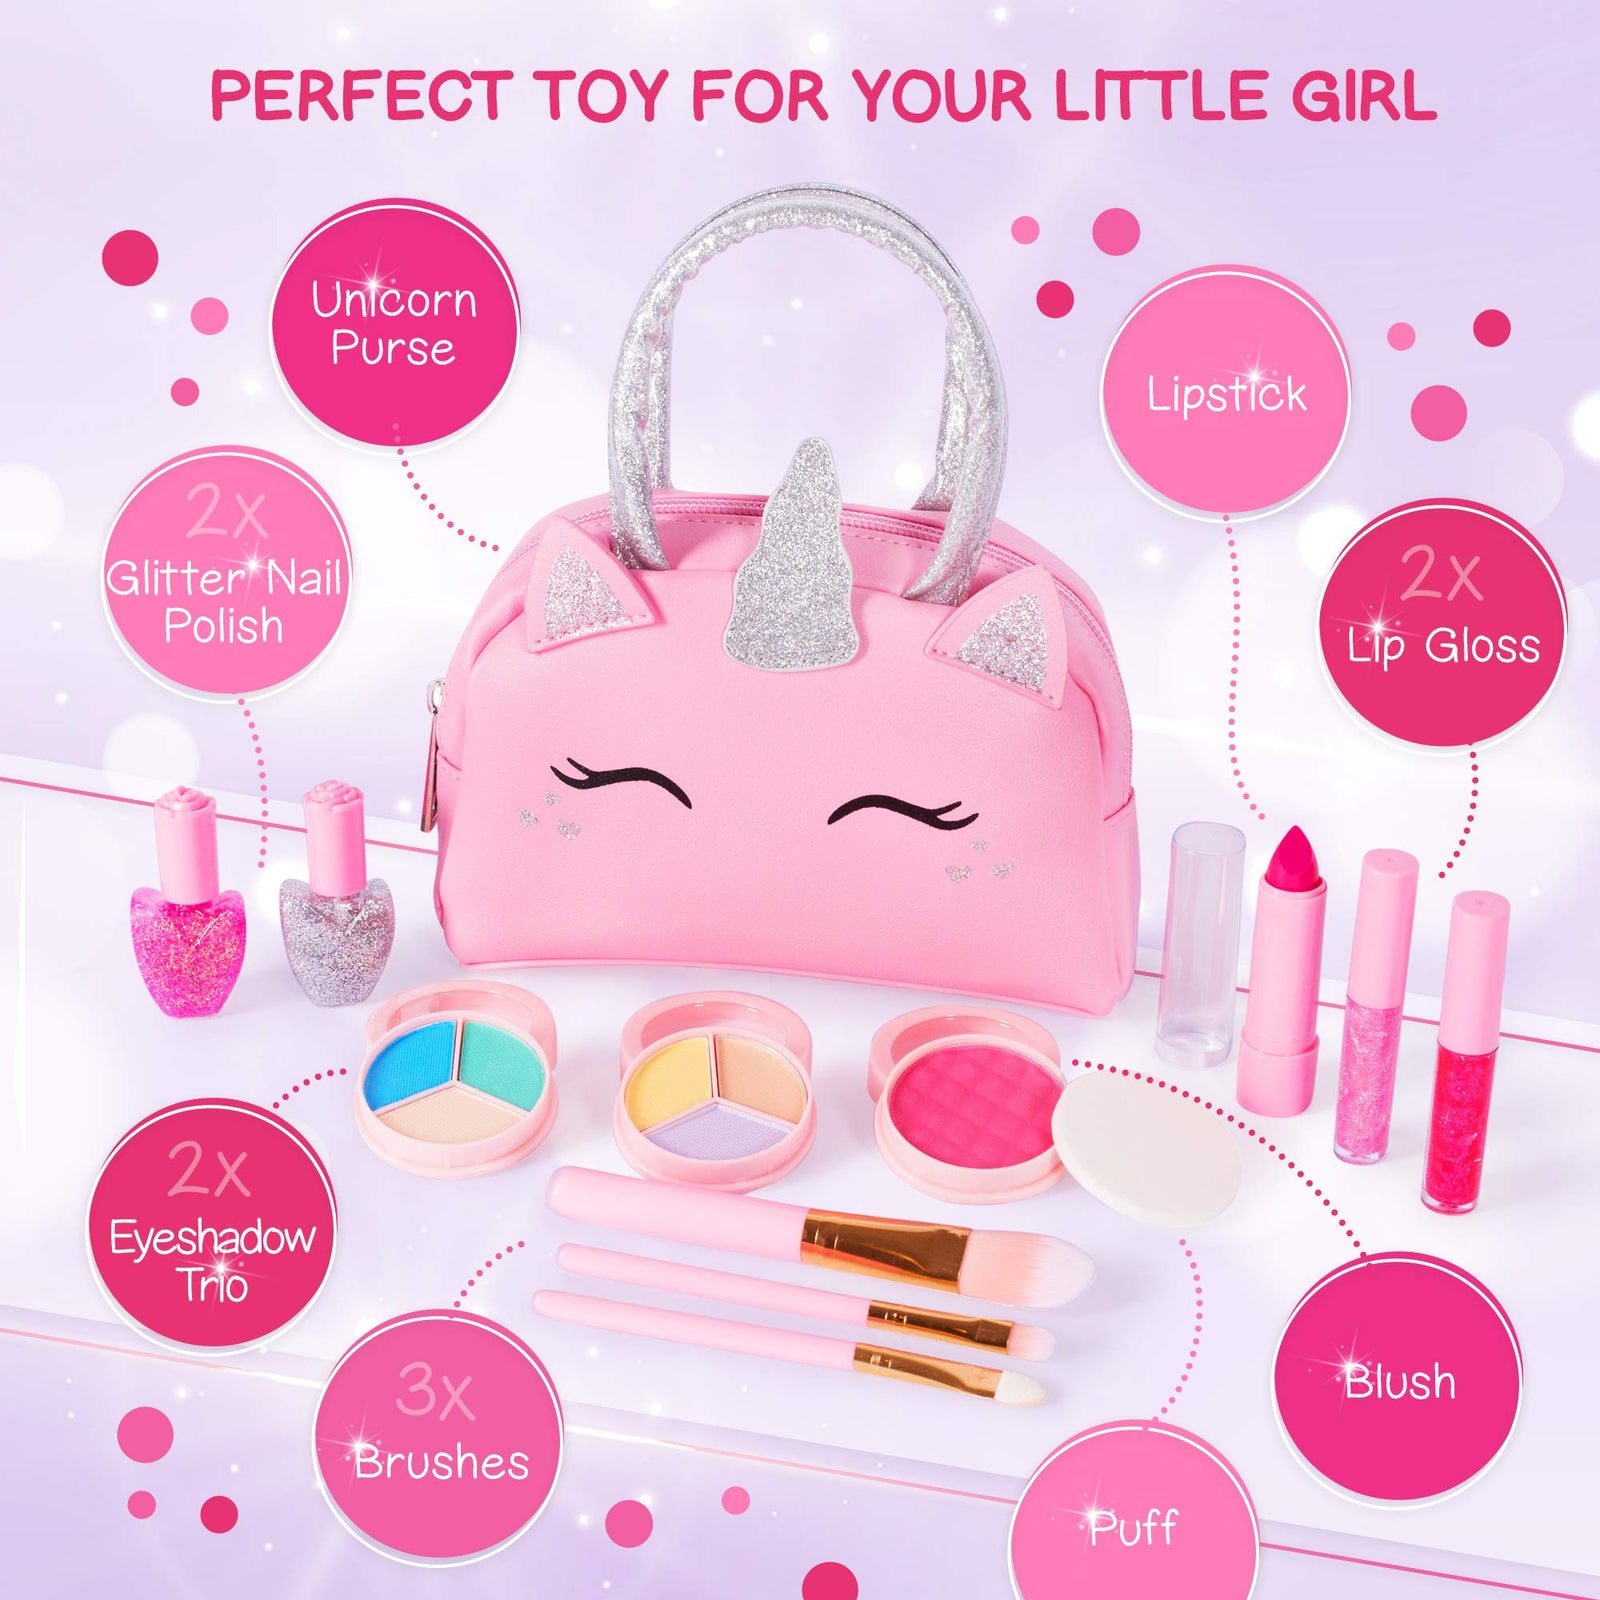 Sprinkles Toyz Kids Real Makeup Kit for Little Girls: with Pink Unicorn Make up Bag - Real, Non Toxic, Washable Make Up Toys - Gifts for Toddler Girl Young Children, Kid Princess Pretend Play Set